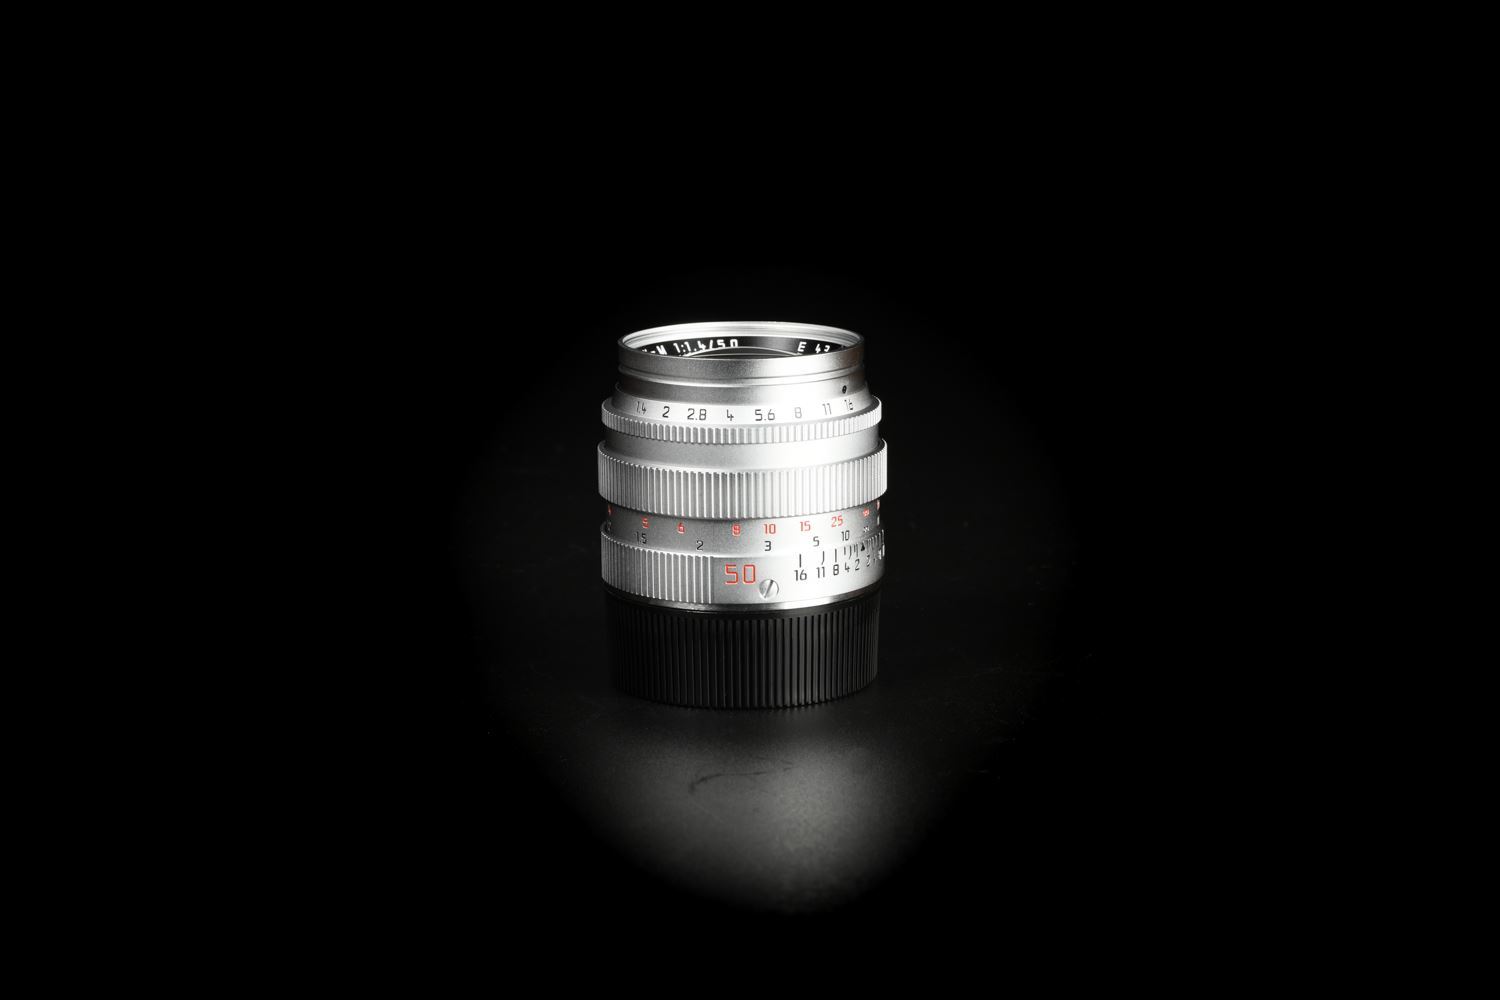 Picture of Leica M6 Classic Traveller OFFERMANN Set with Summilux-M 50mm f/1.4 Ver.2 Silver